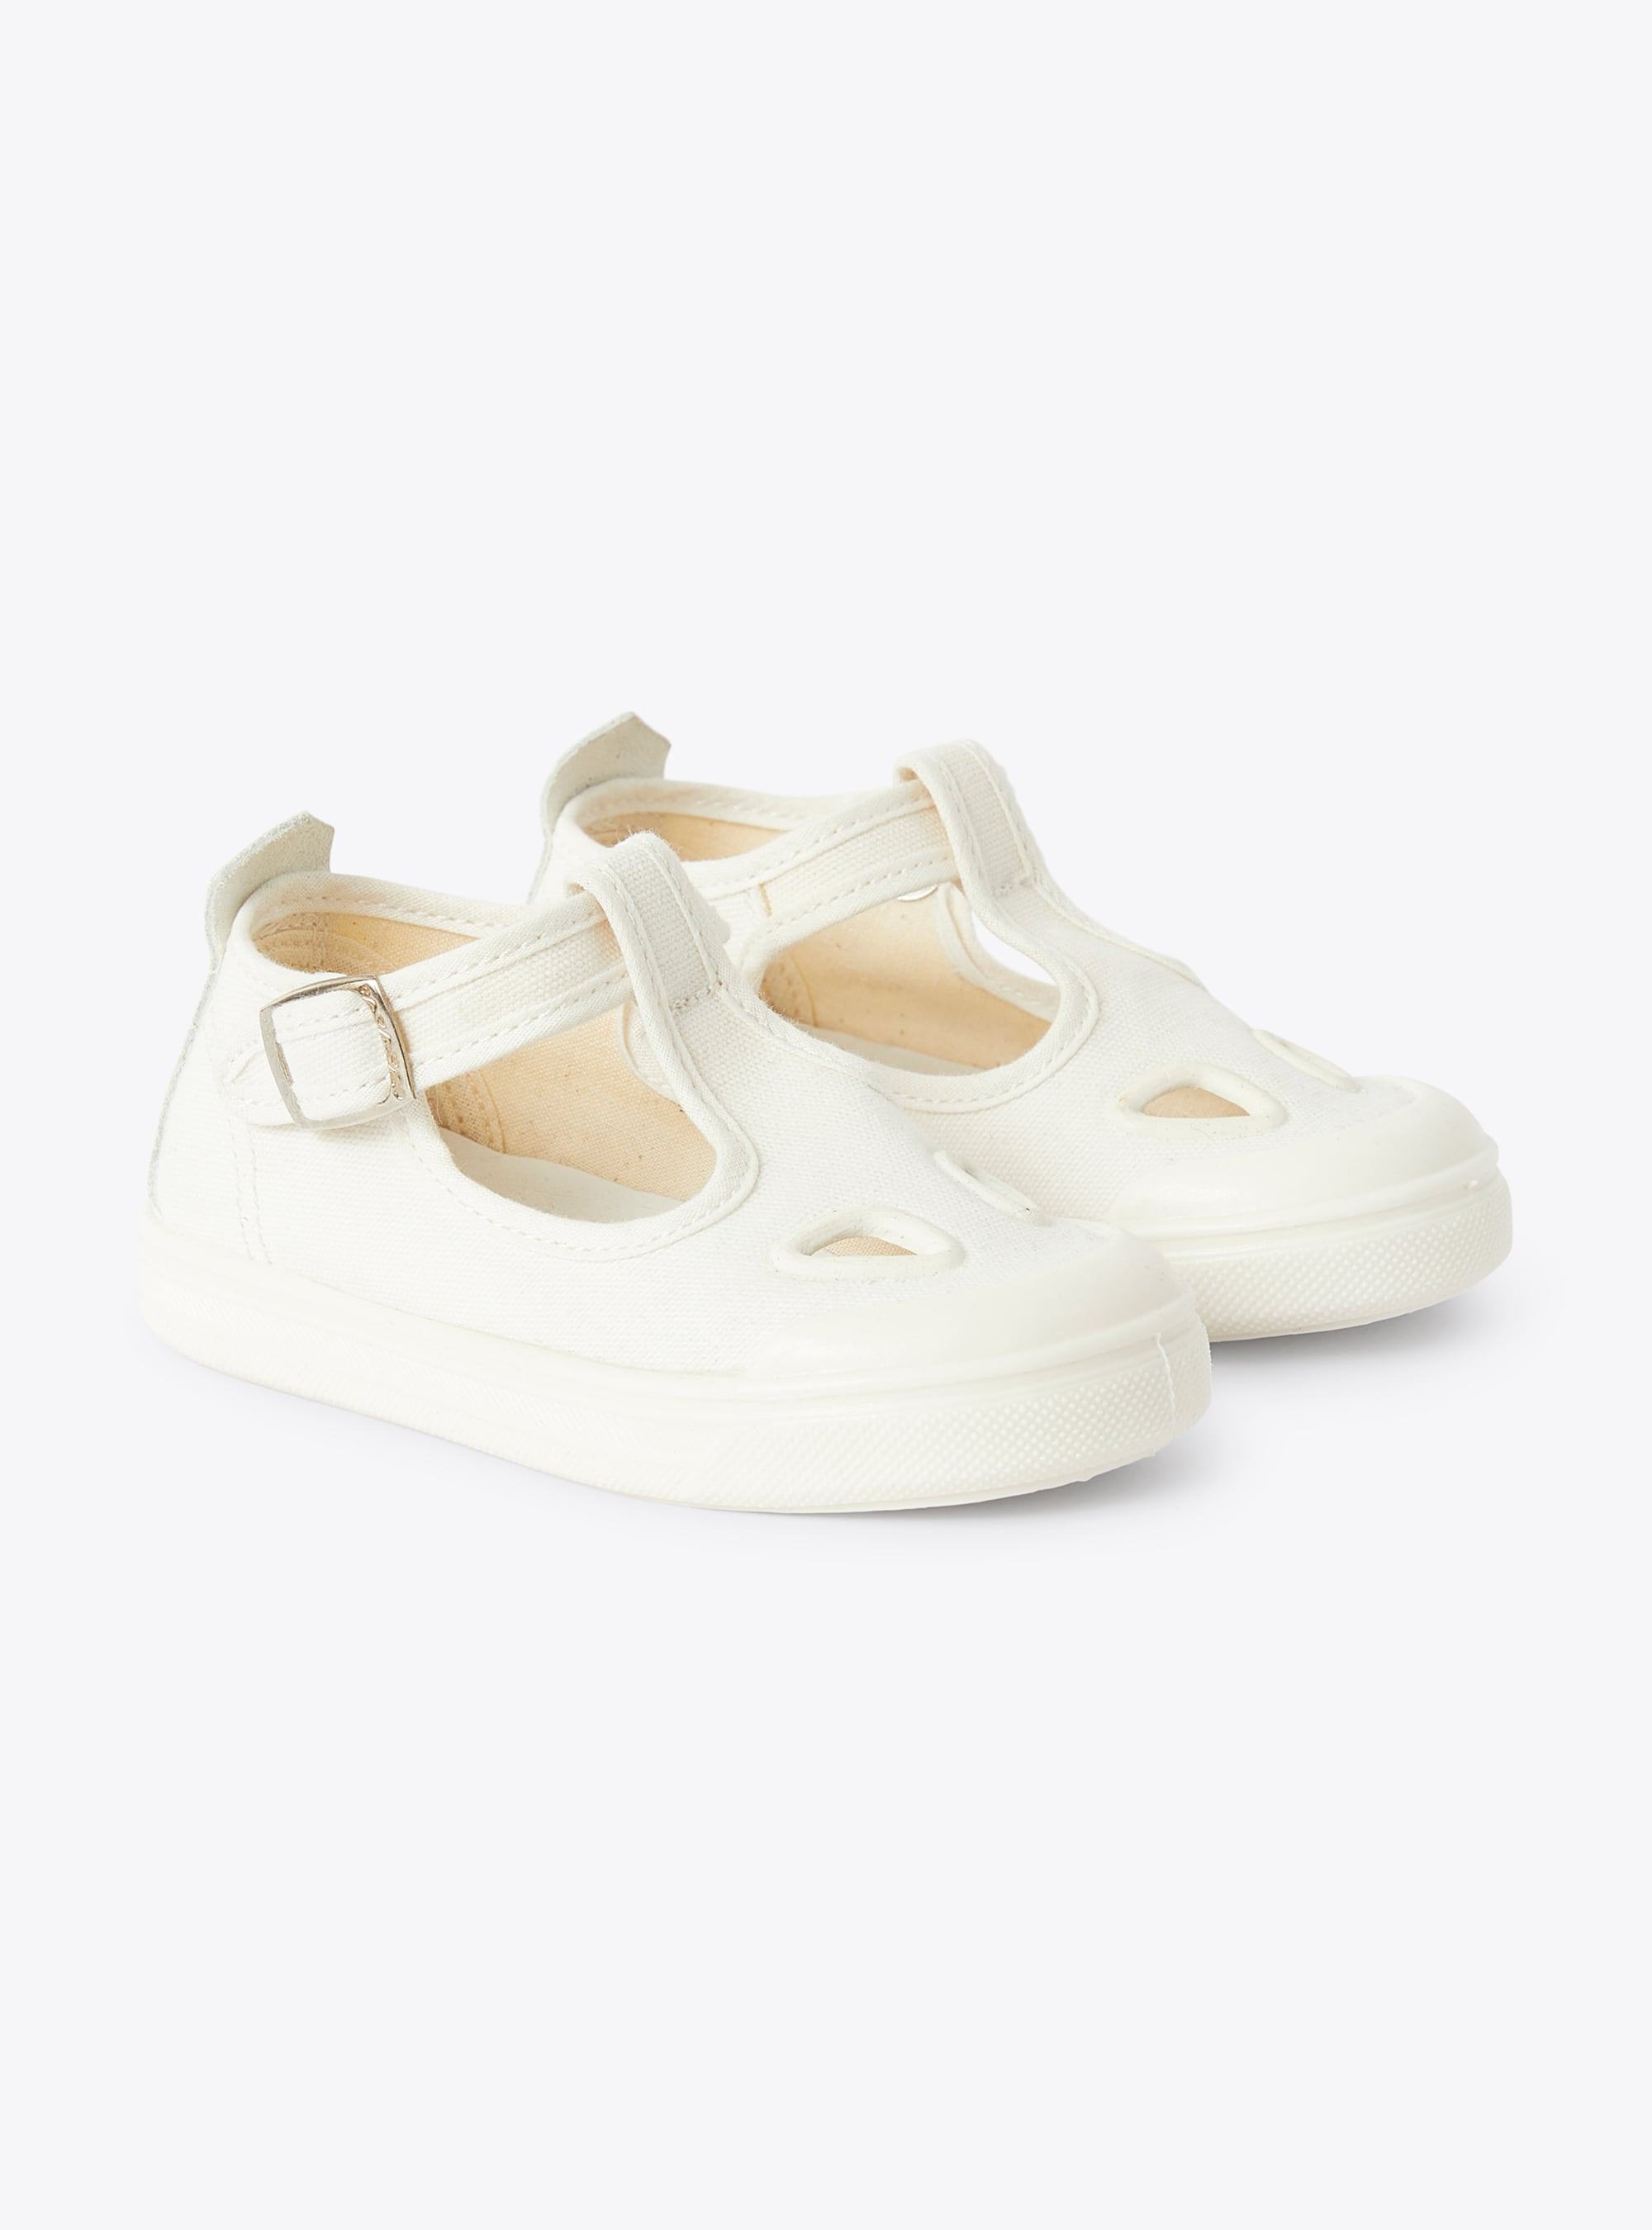 Sandal in white canvas with a t-bar design and decorative holes - Shoes - Il Gufo